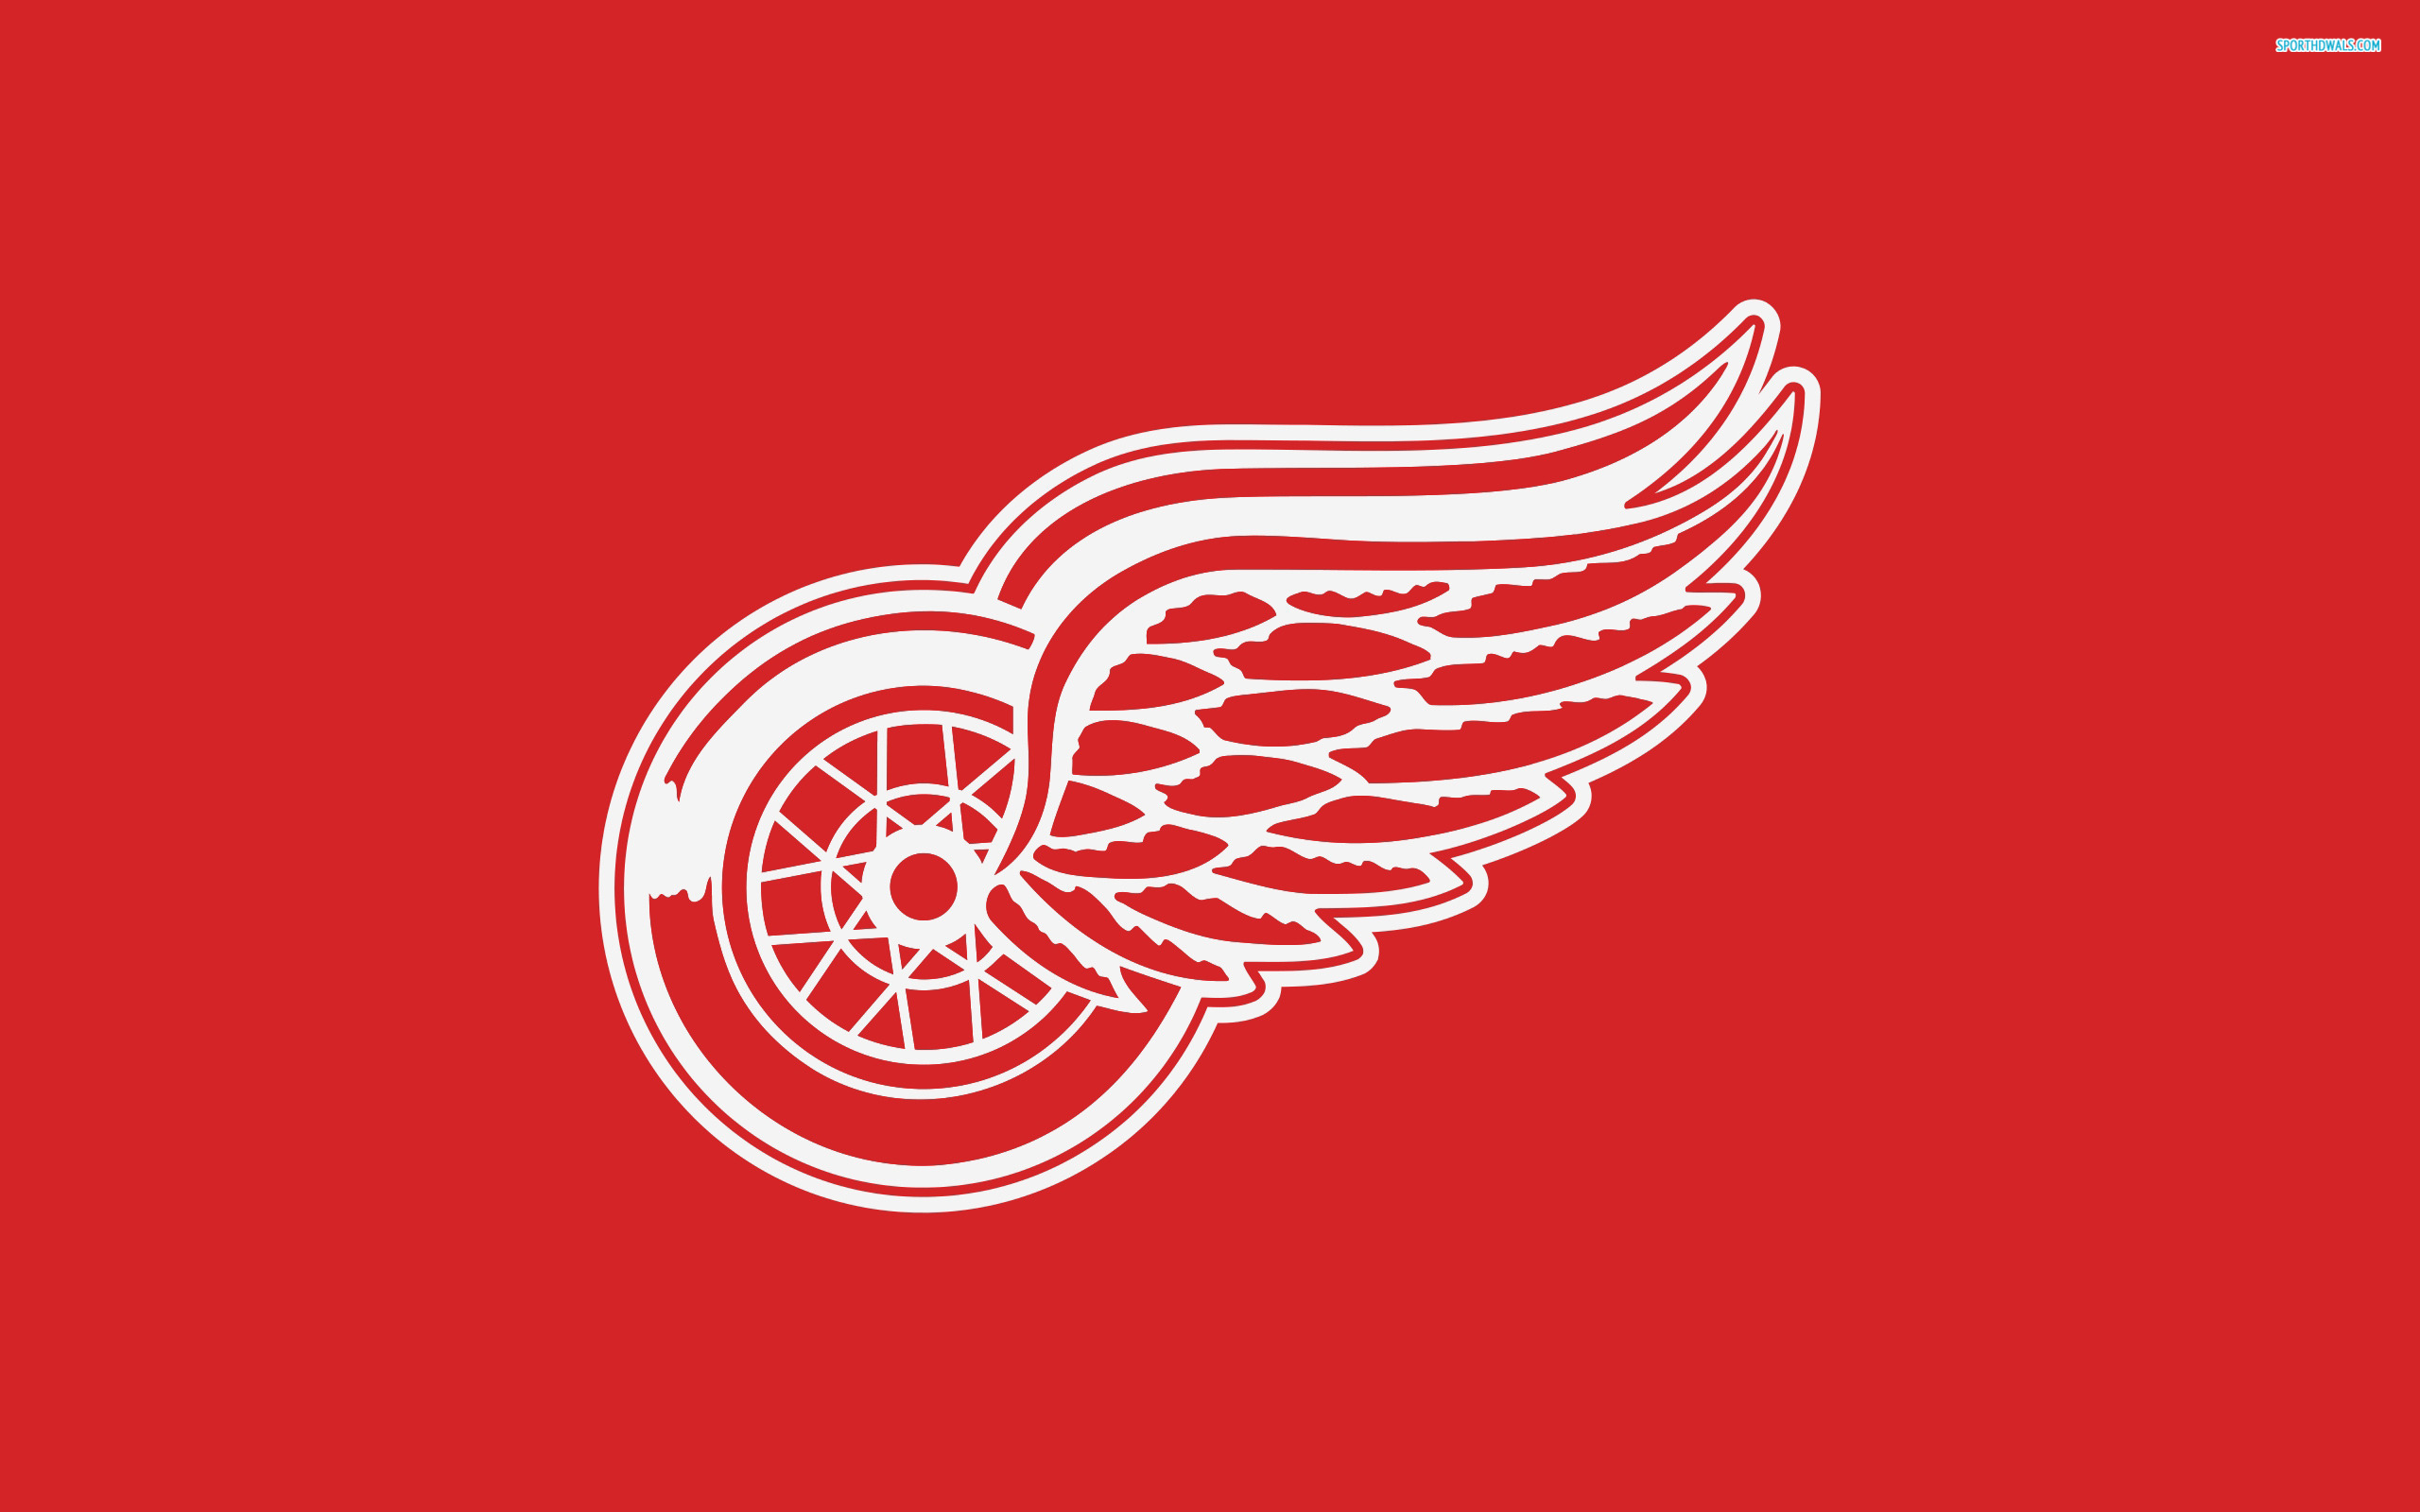 Detroit Red Wings Backgrounds, Compatible - PC, Mobile, Gadgets| 2560x1600 px